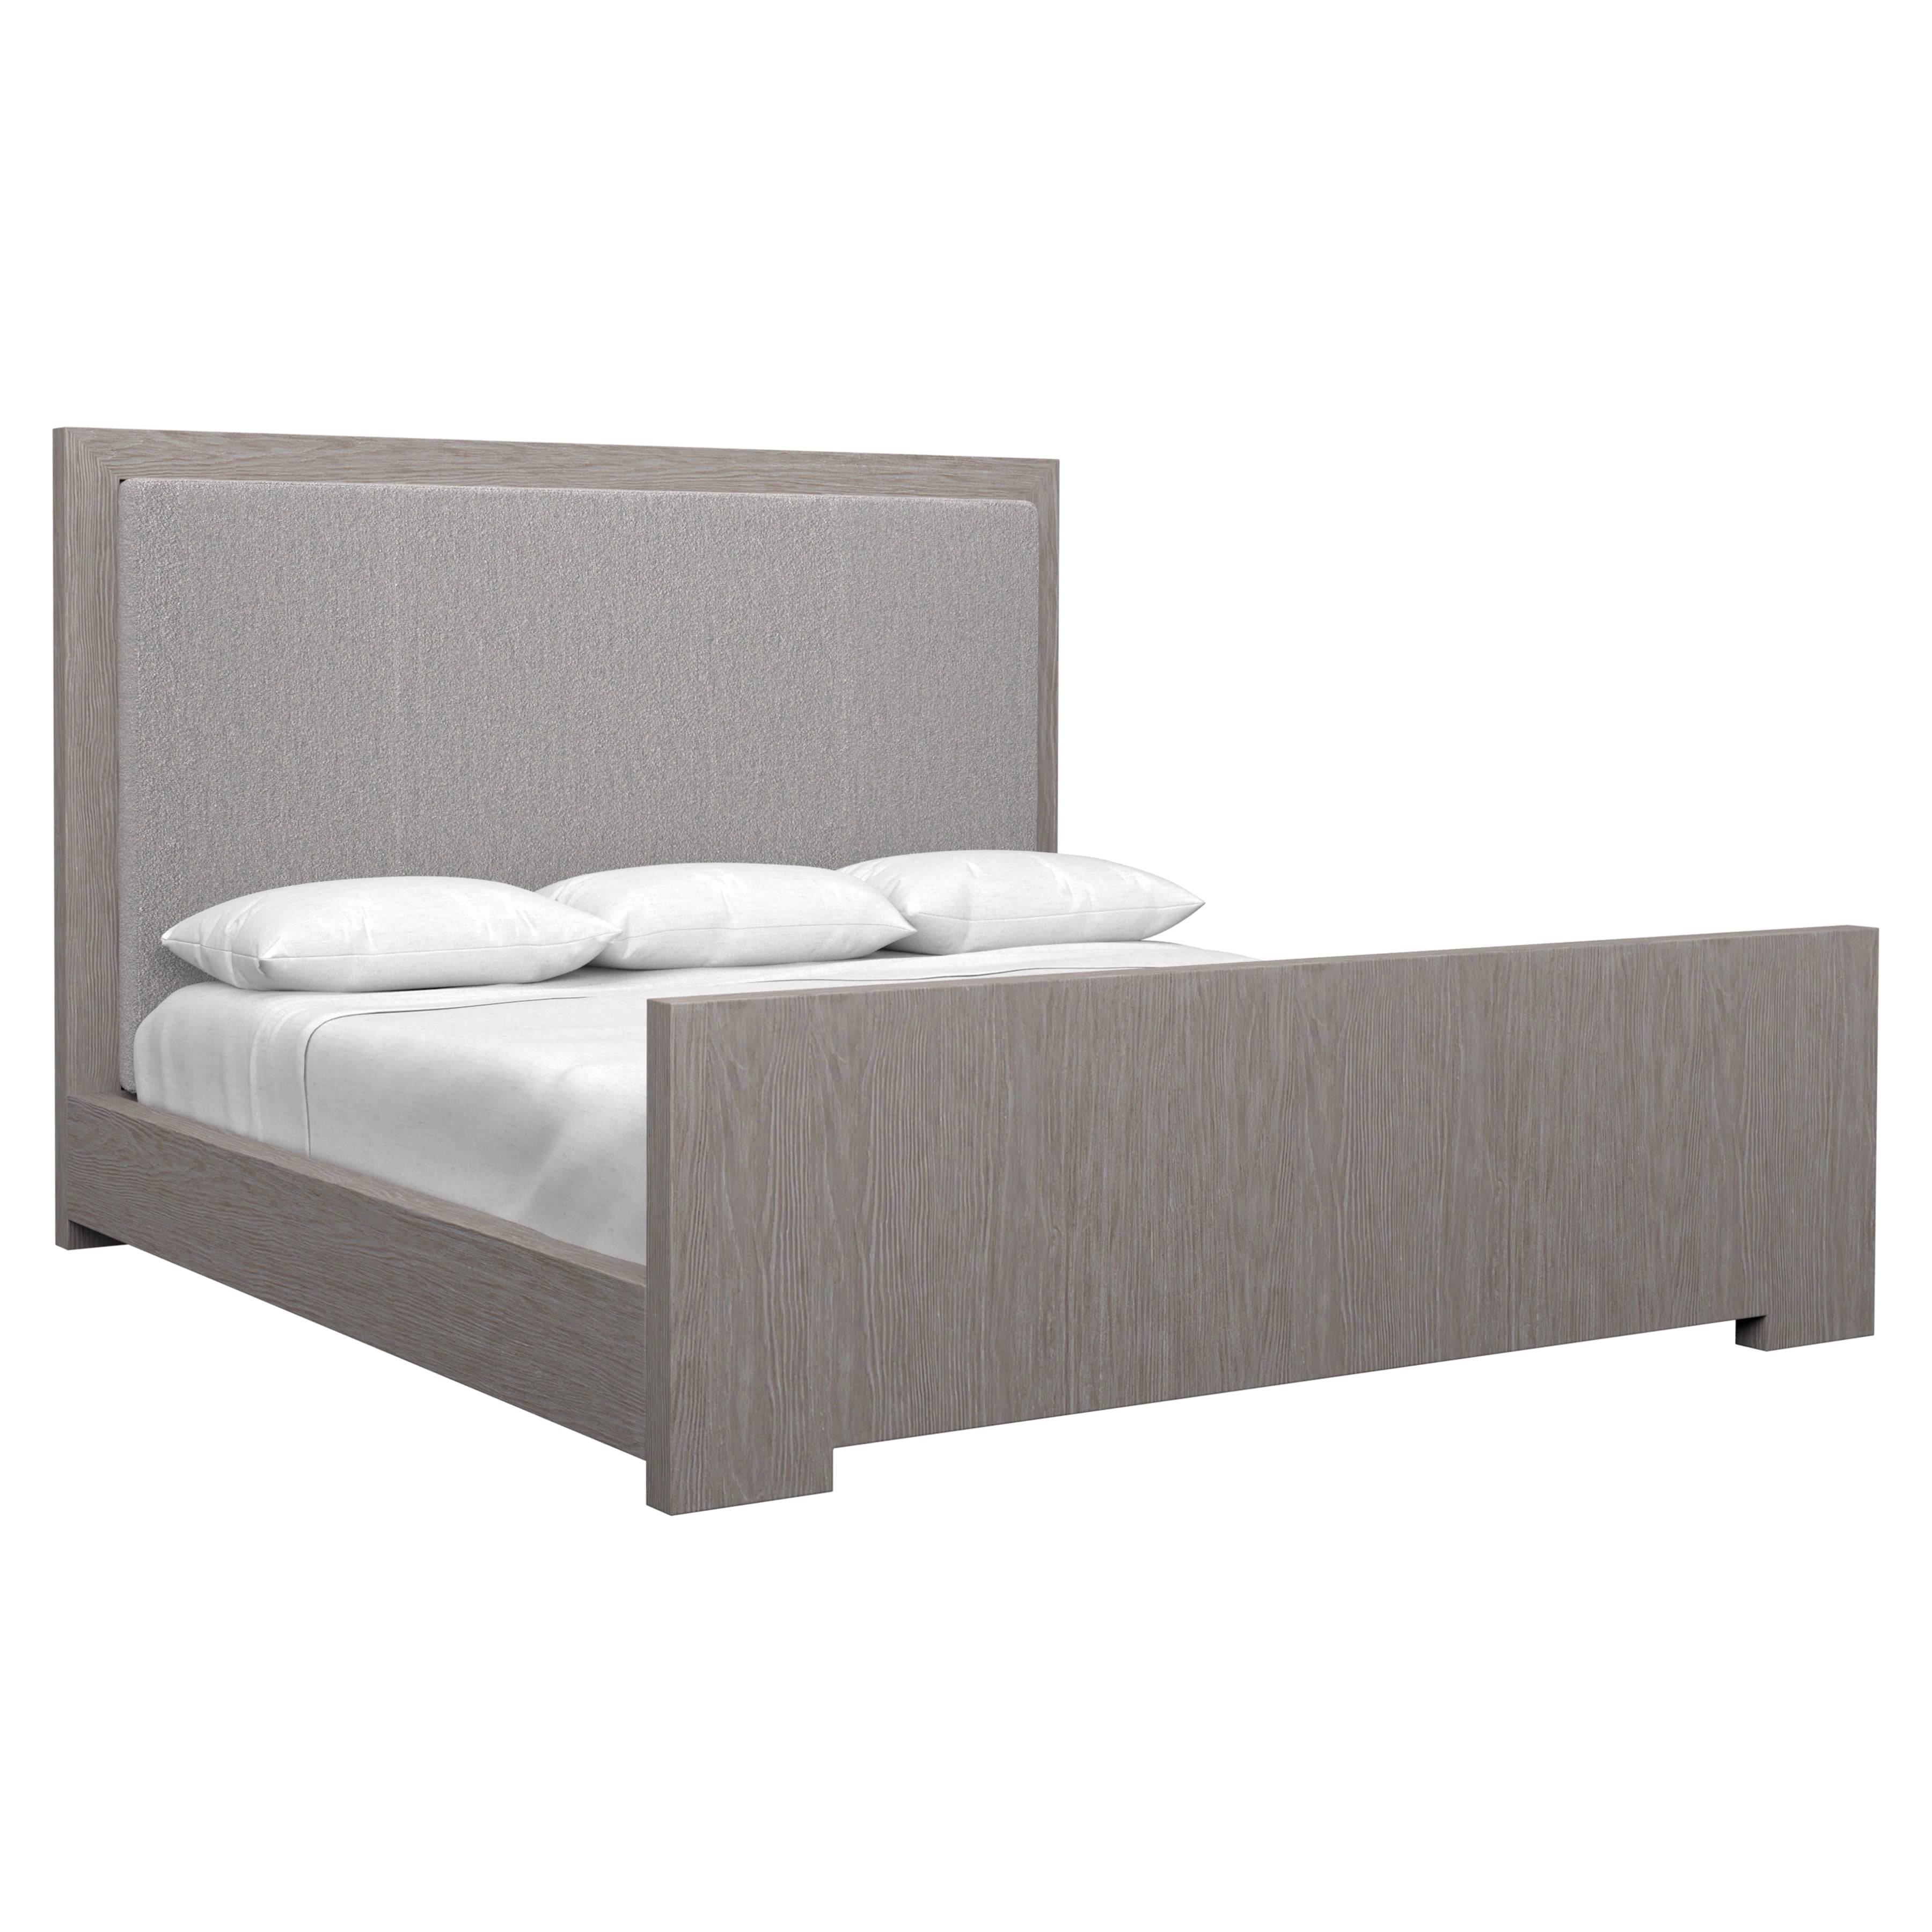 Trianon Queen Panel Bed in Gris Wood Finish